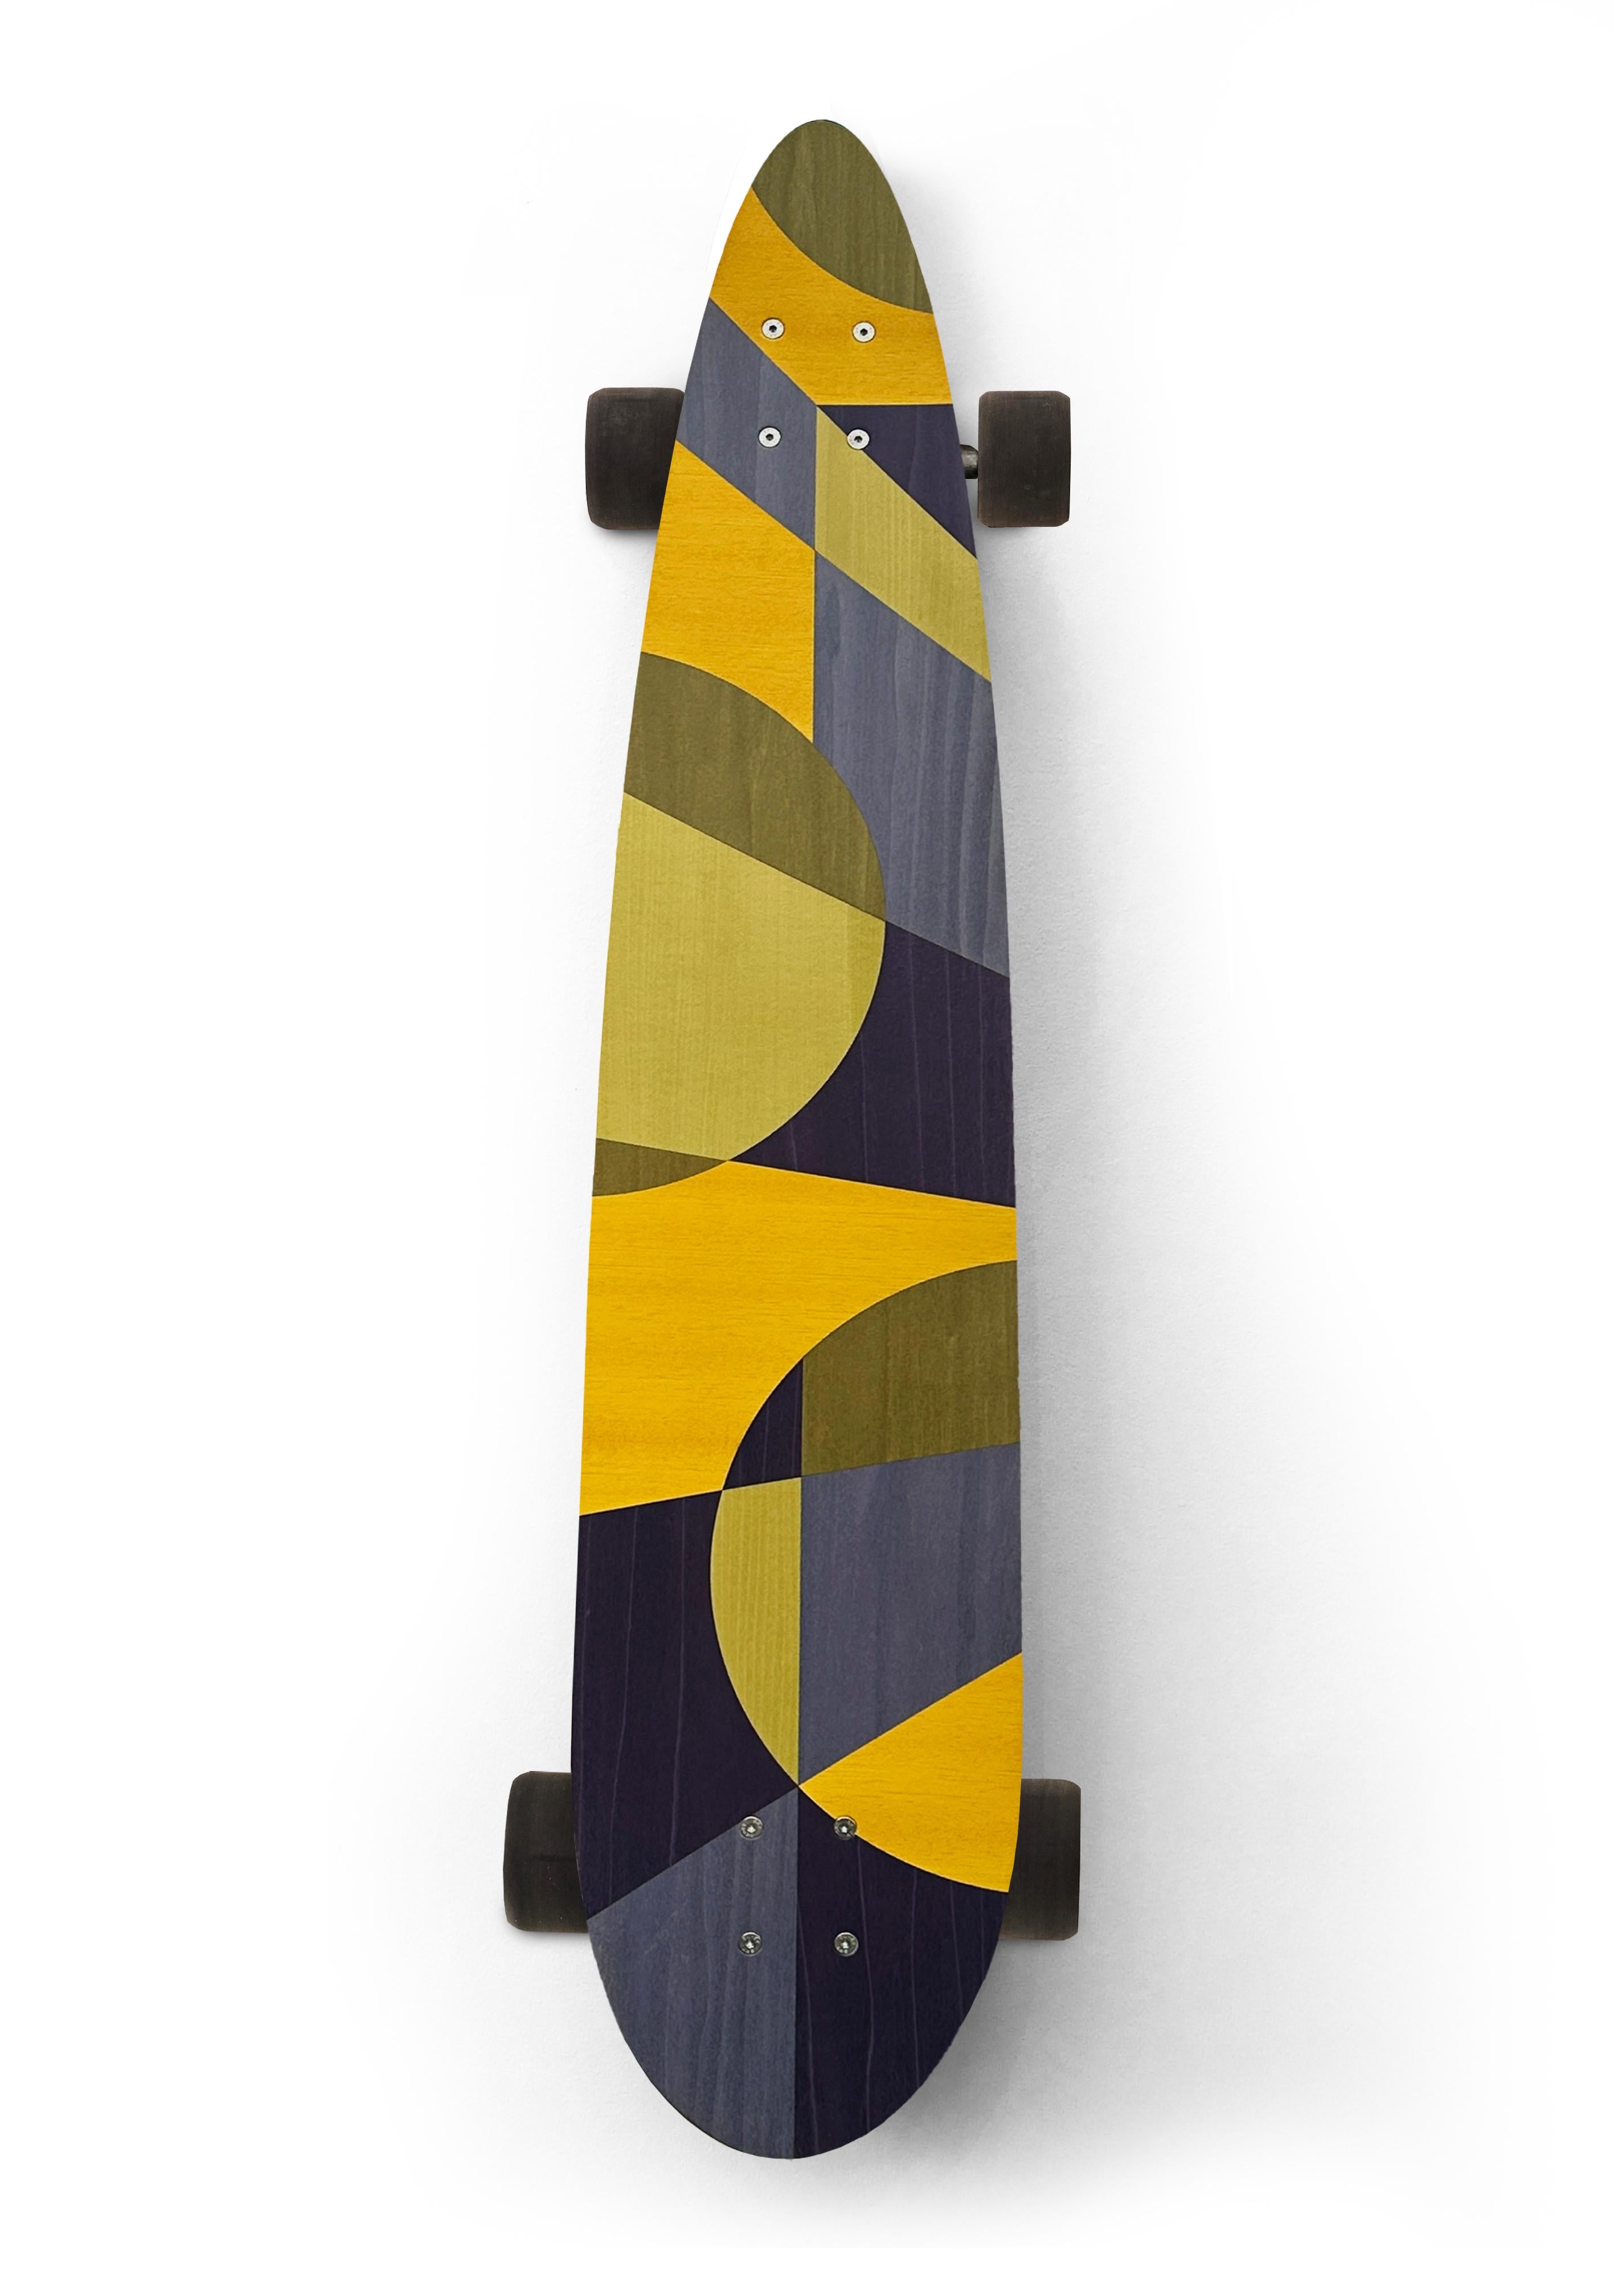 The w o o d p o p pintail longboards are handcrafted in workshops on either side of the Welsh/English border the UK. Each one is made from best quality Finnish Birch and vacuum laminated to form a concave deck featuring a unique marquetry inlay